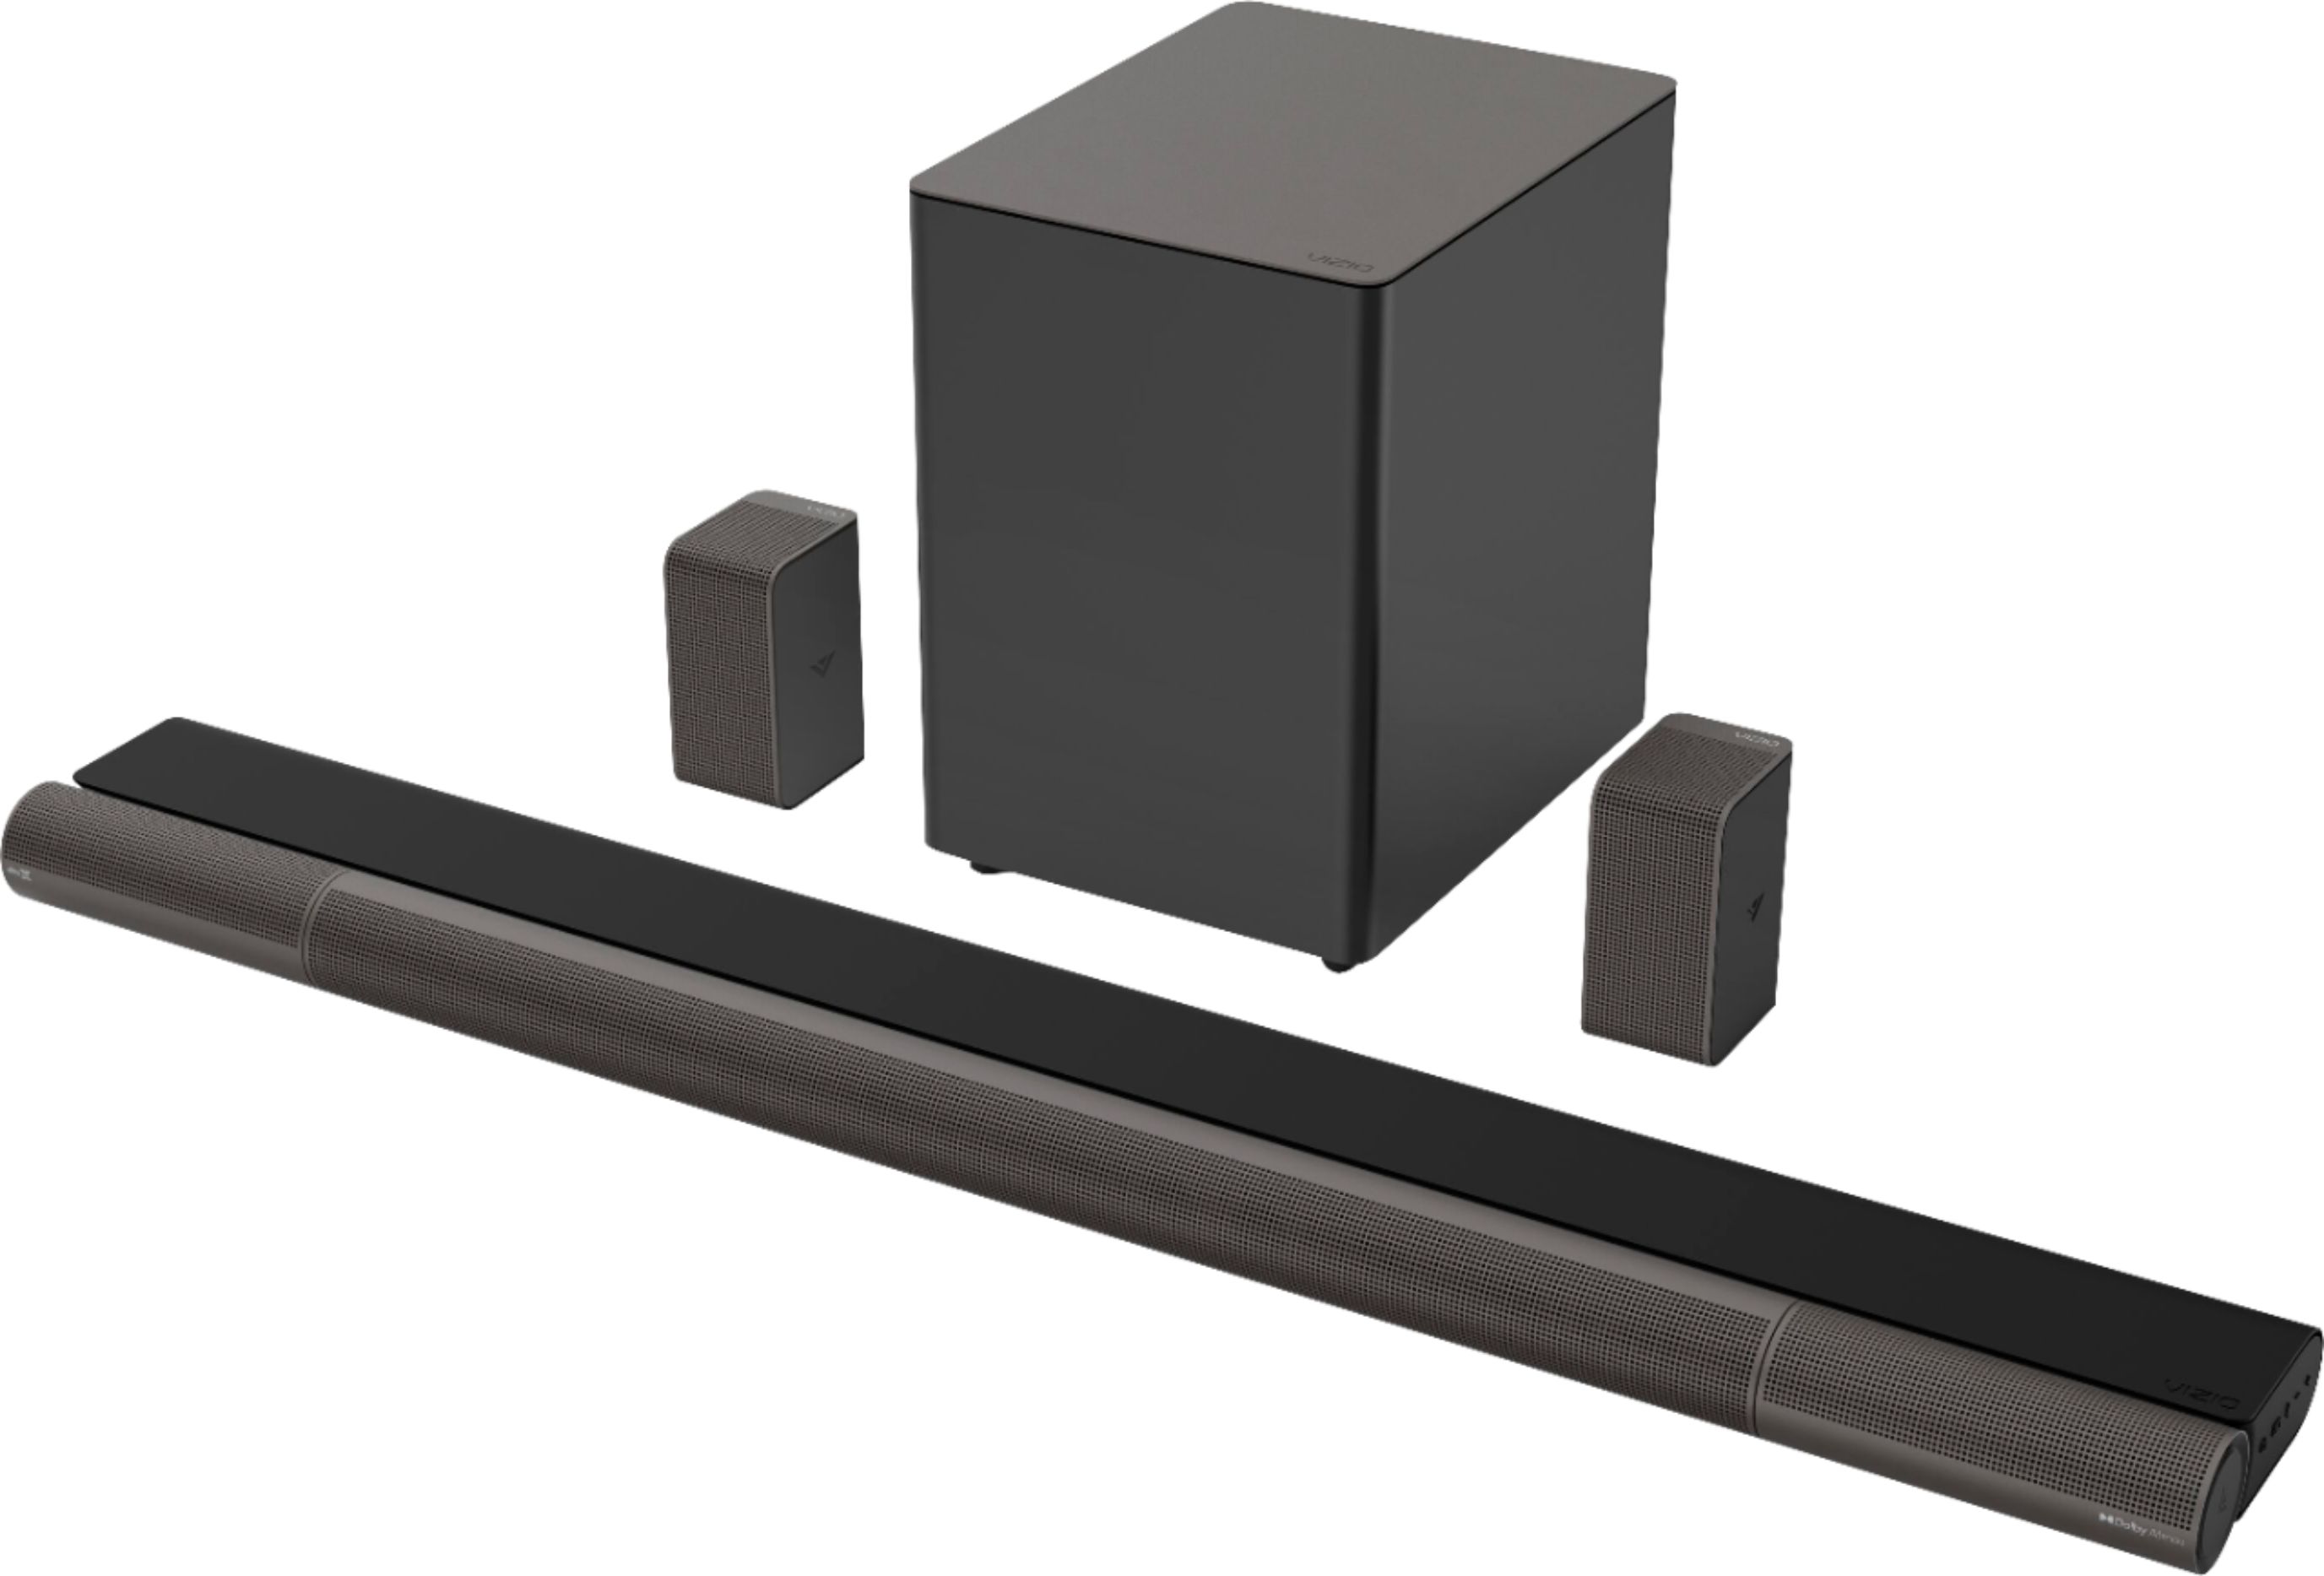 Angle View: VIZIO - 5.1.4-Channel Elevate Soundbar with Wireless Subwoofer and Rotating Speakers for Dolby Atmos/DTS:X - Charcoal Gray